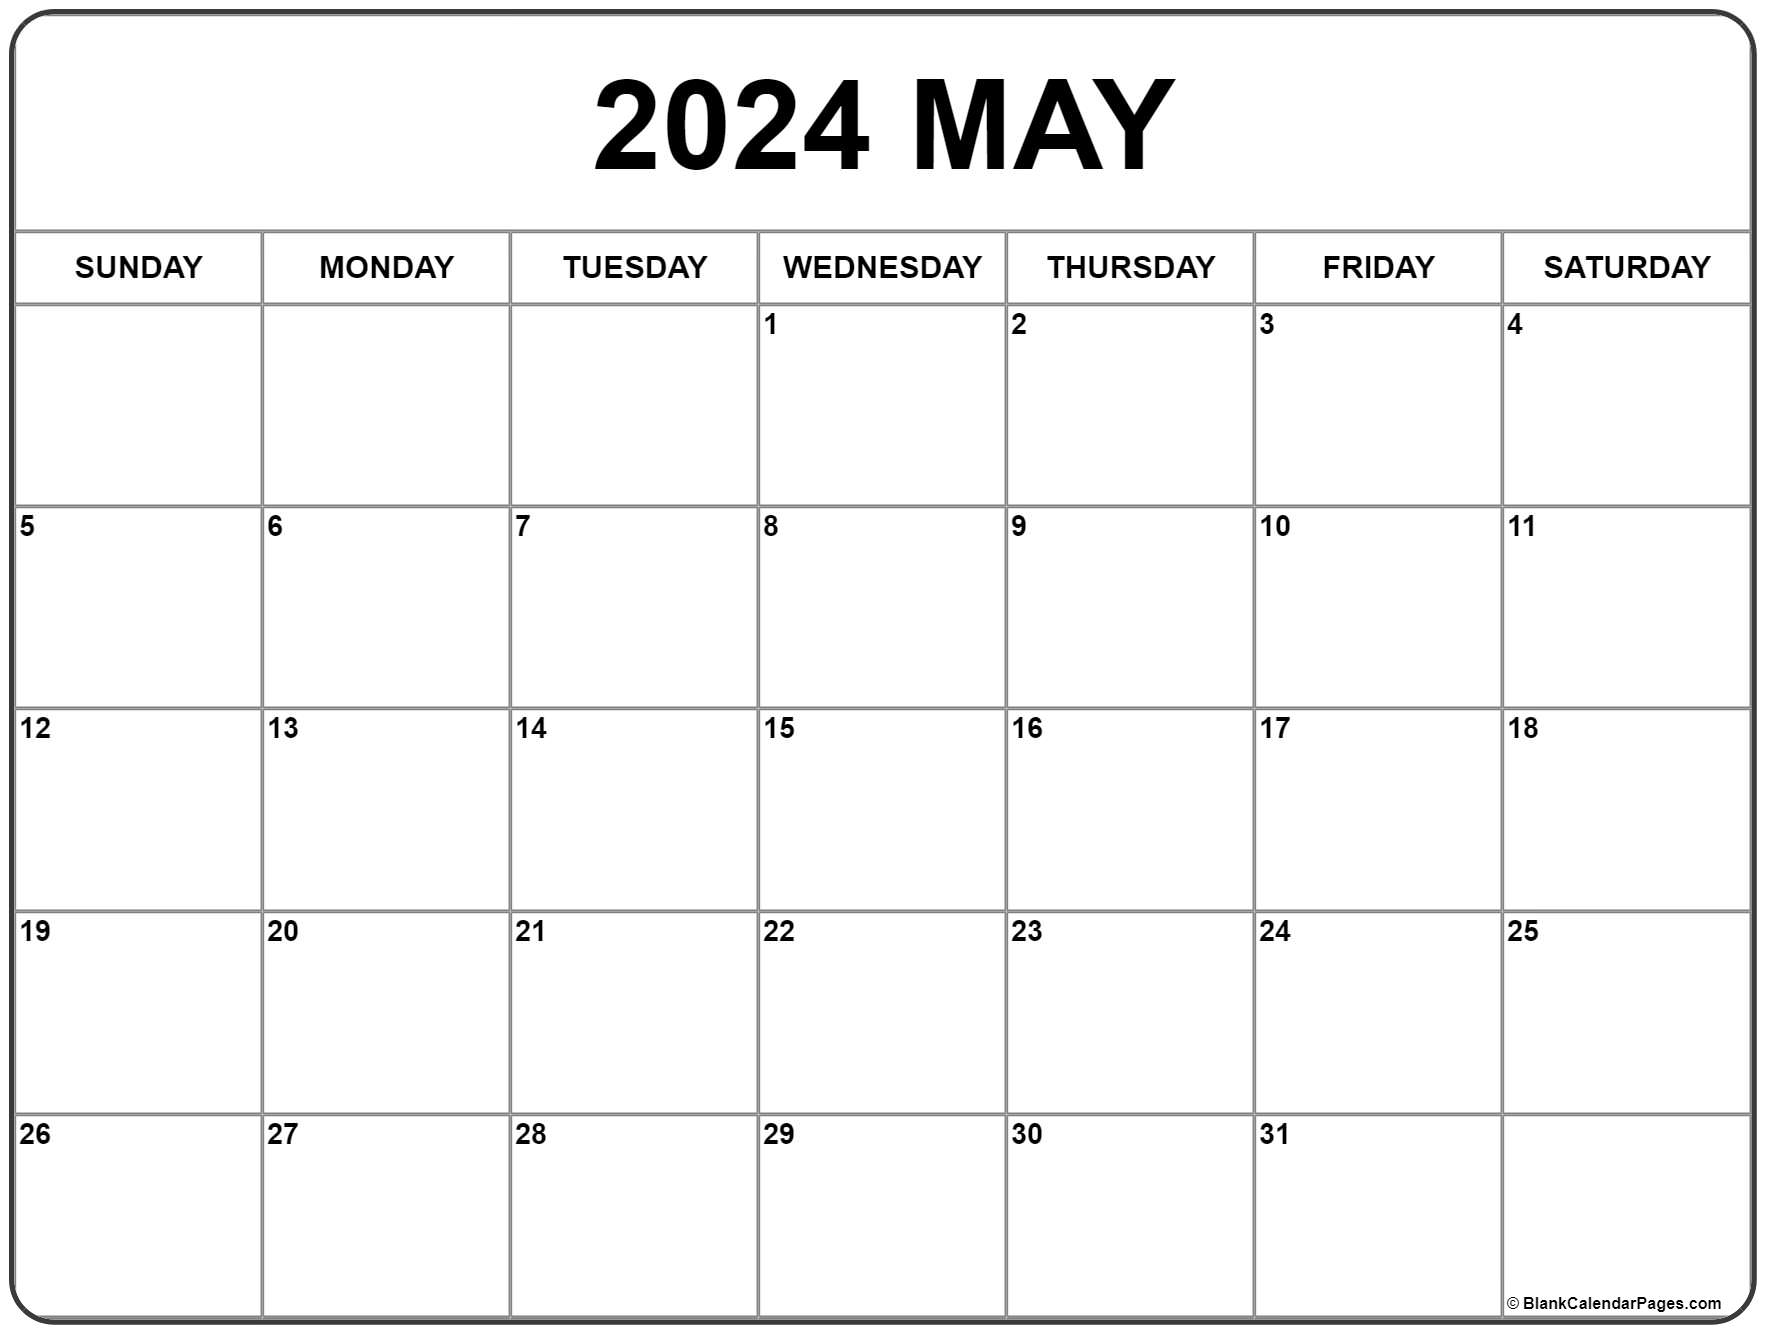 Calendar For May 2021 May 2021 calendar | free printable monthly calendars